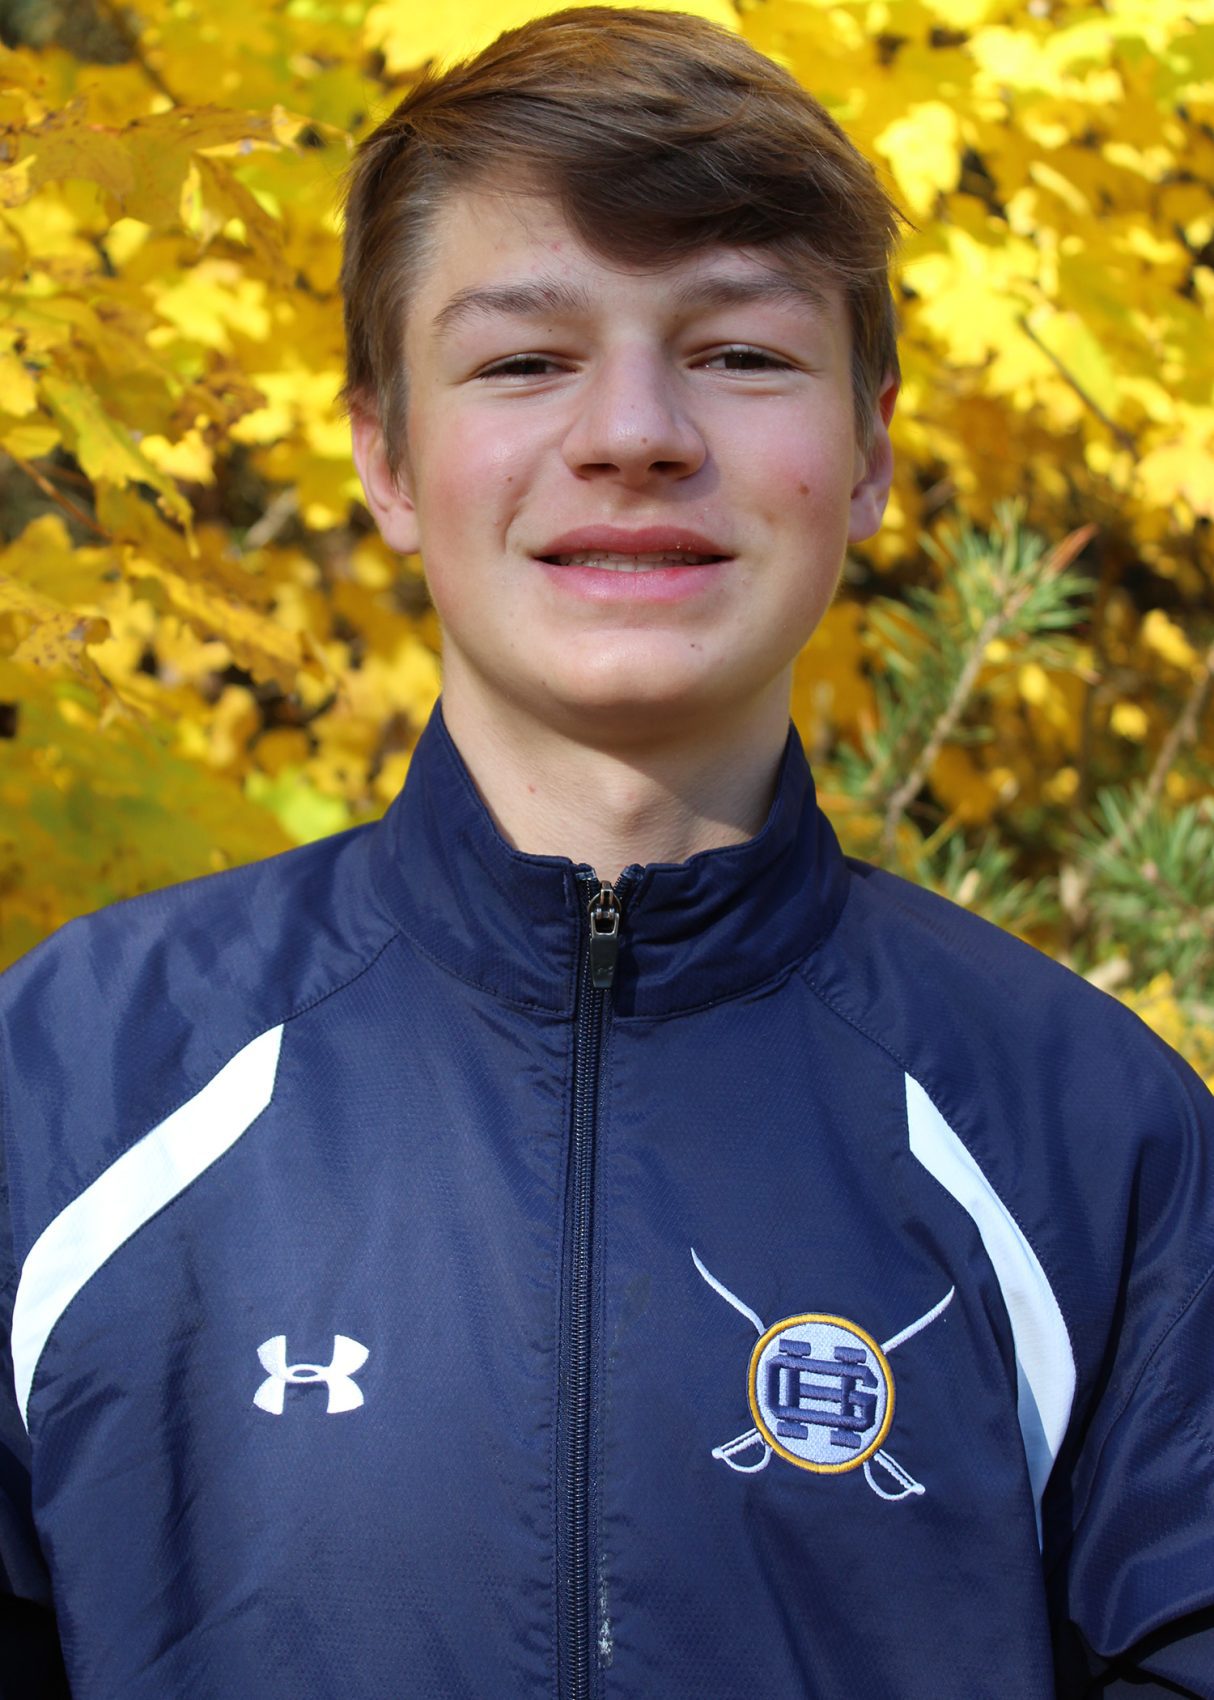 Grand Haven’s Seth Norder chosen LSJ boys cross country runner of the month